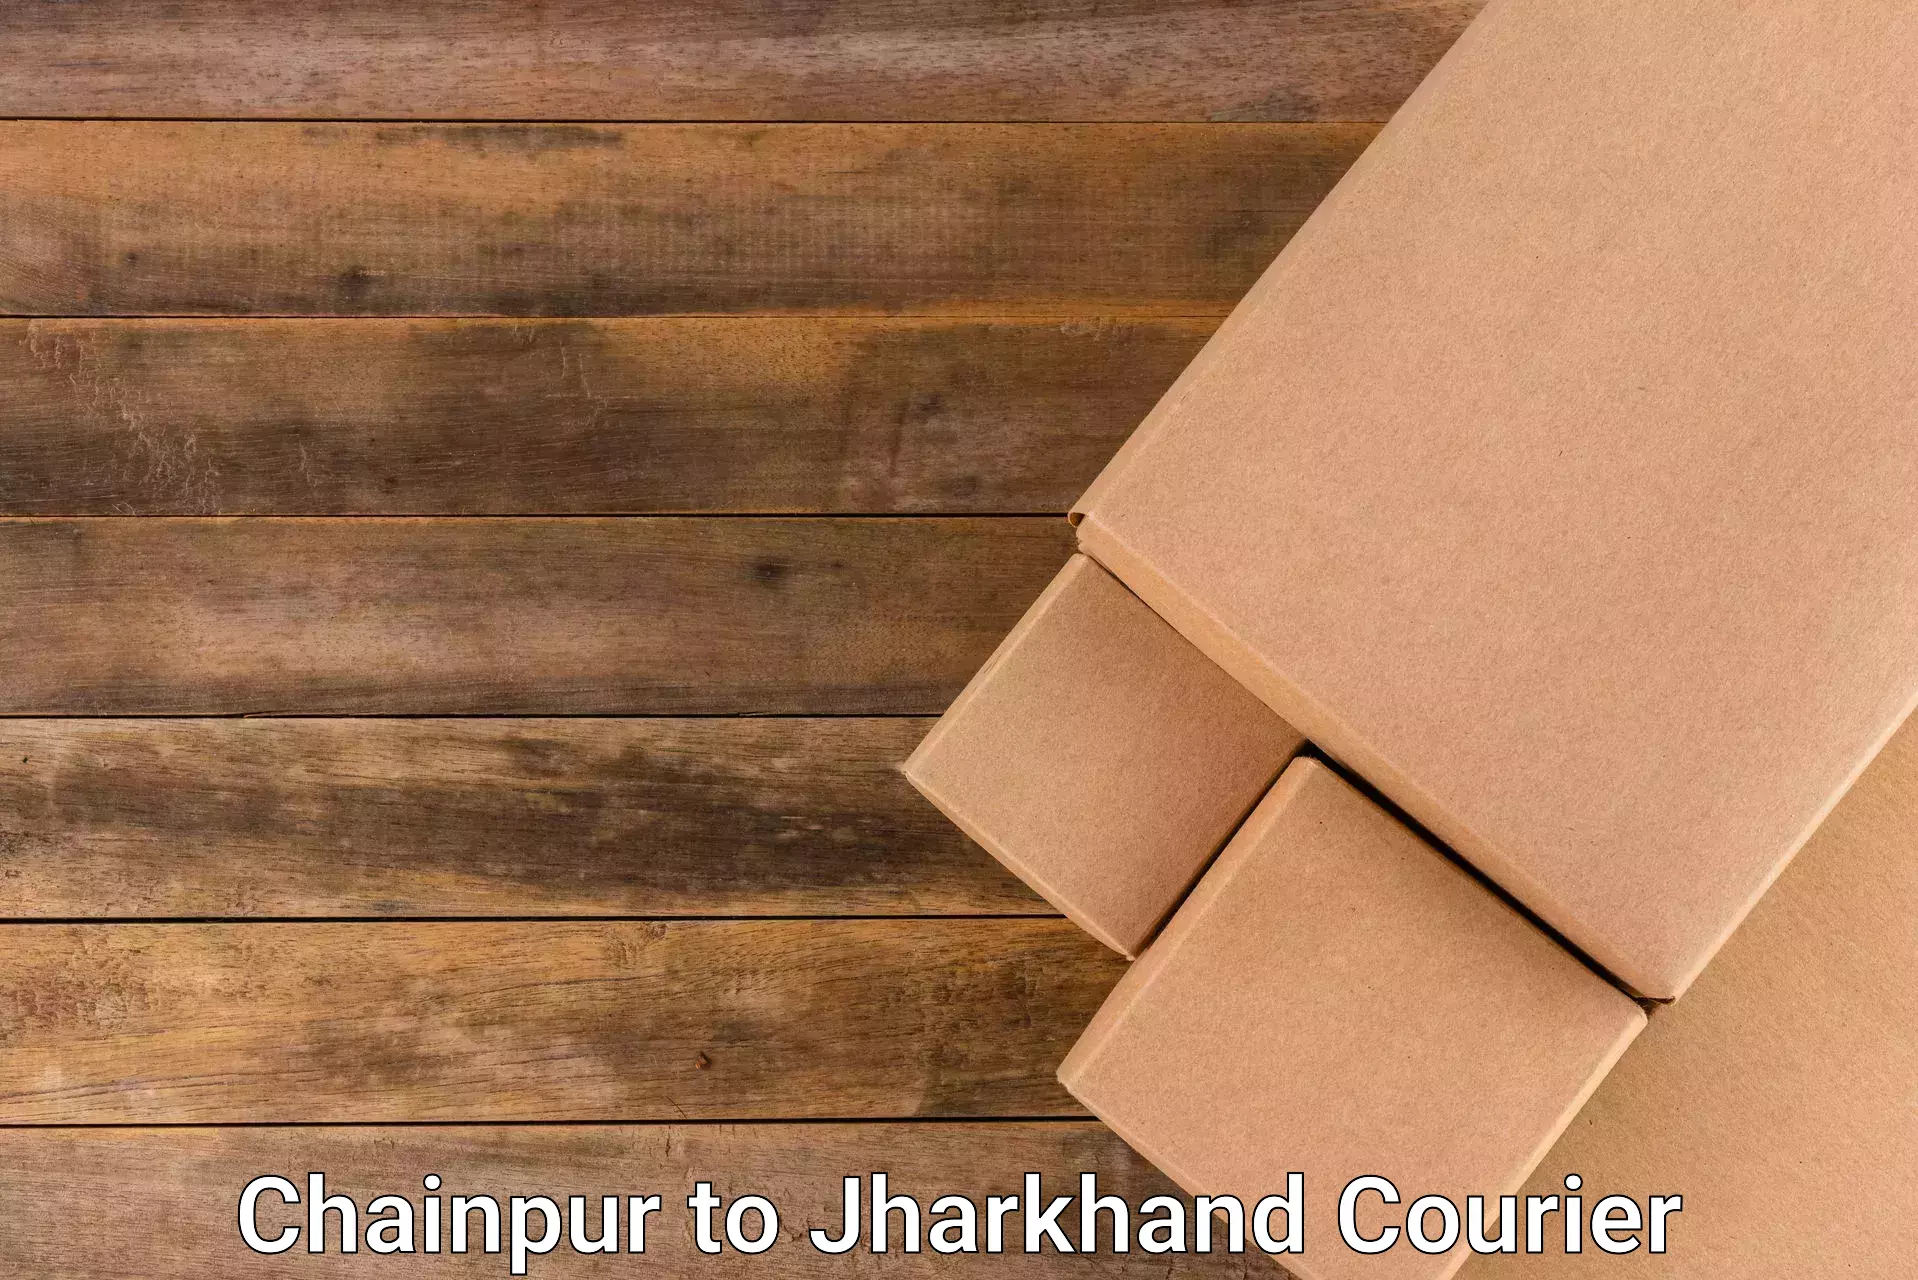 State-of-the-art courier technology Chainpur to Bokaro Steel City